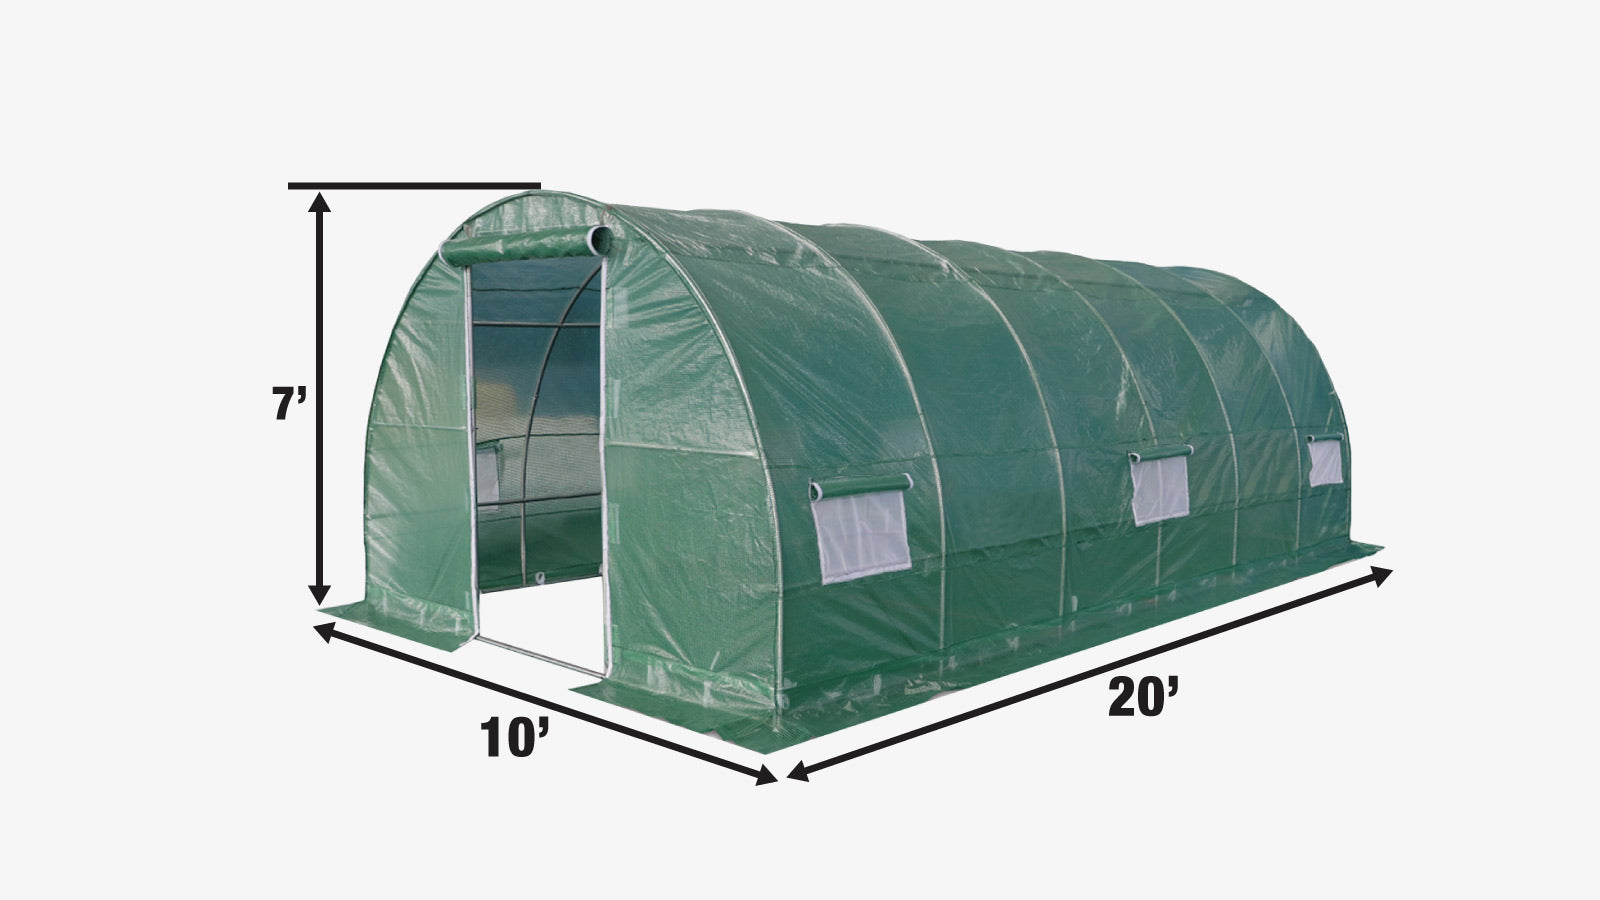 TMG Industrial 10’ x 20’ Tunnel Greenhouse Grow Tent w/Ripstop Leno Cover, Cold Frame, Roll-Up Mesh Windows, Round Top Roof, TMG-GH1020R-specifications-image